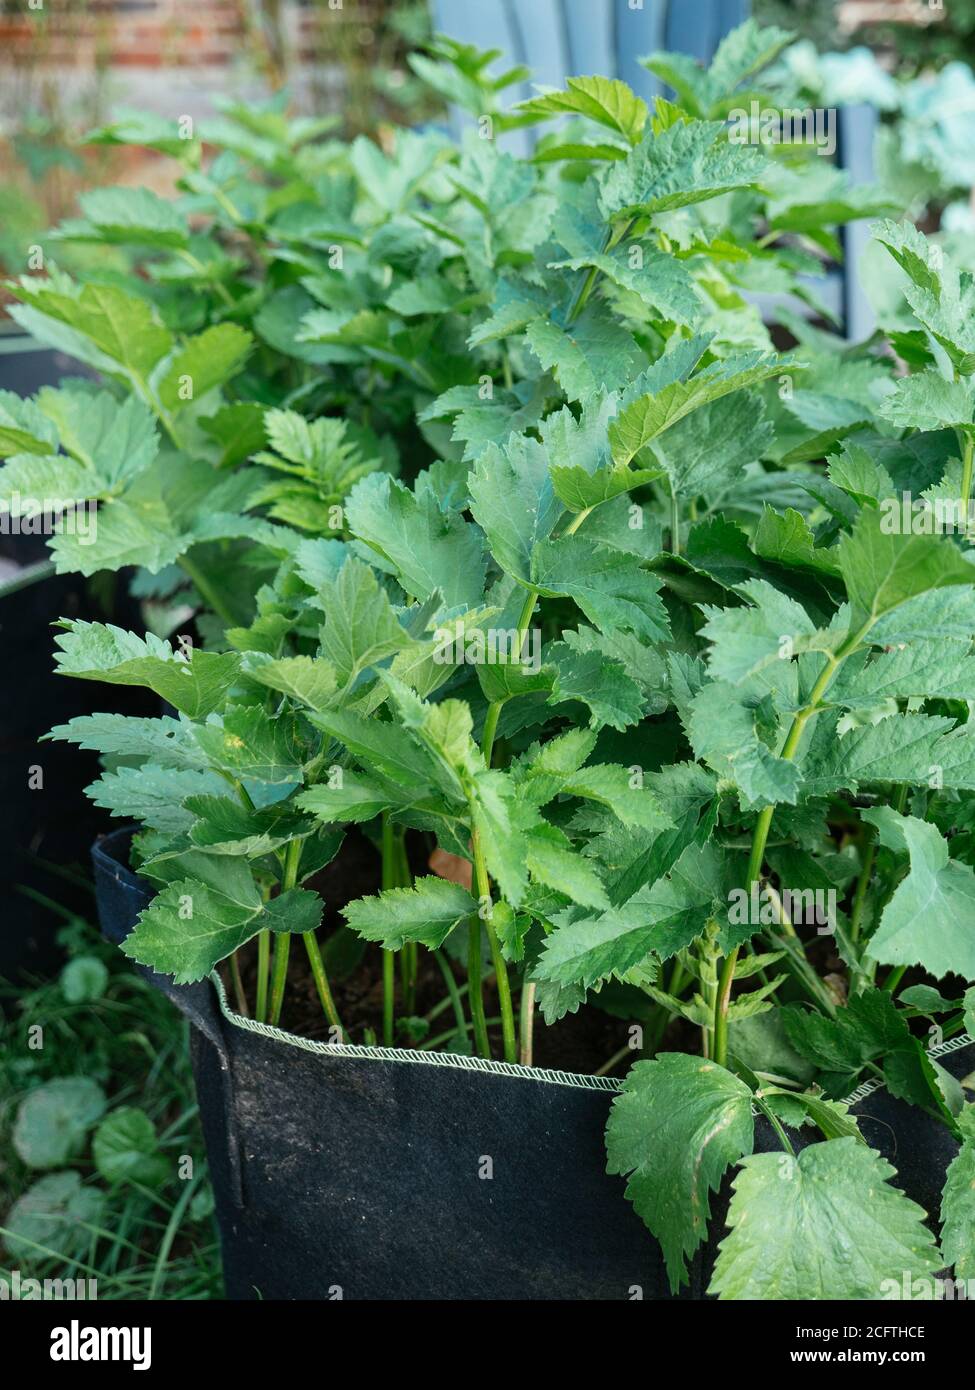 https://c8.alamy.com/comp/2CFTHCE/parsnips-in-grow-bags-2CFTHCE.jpg